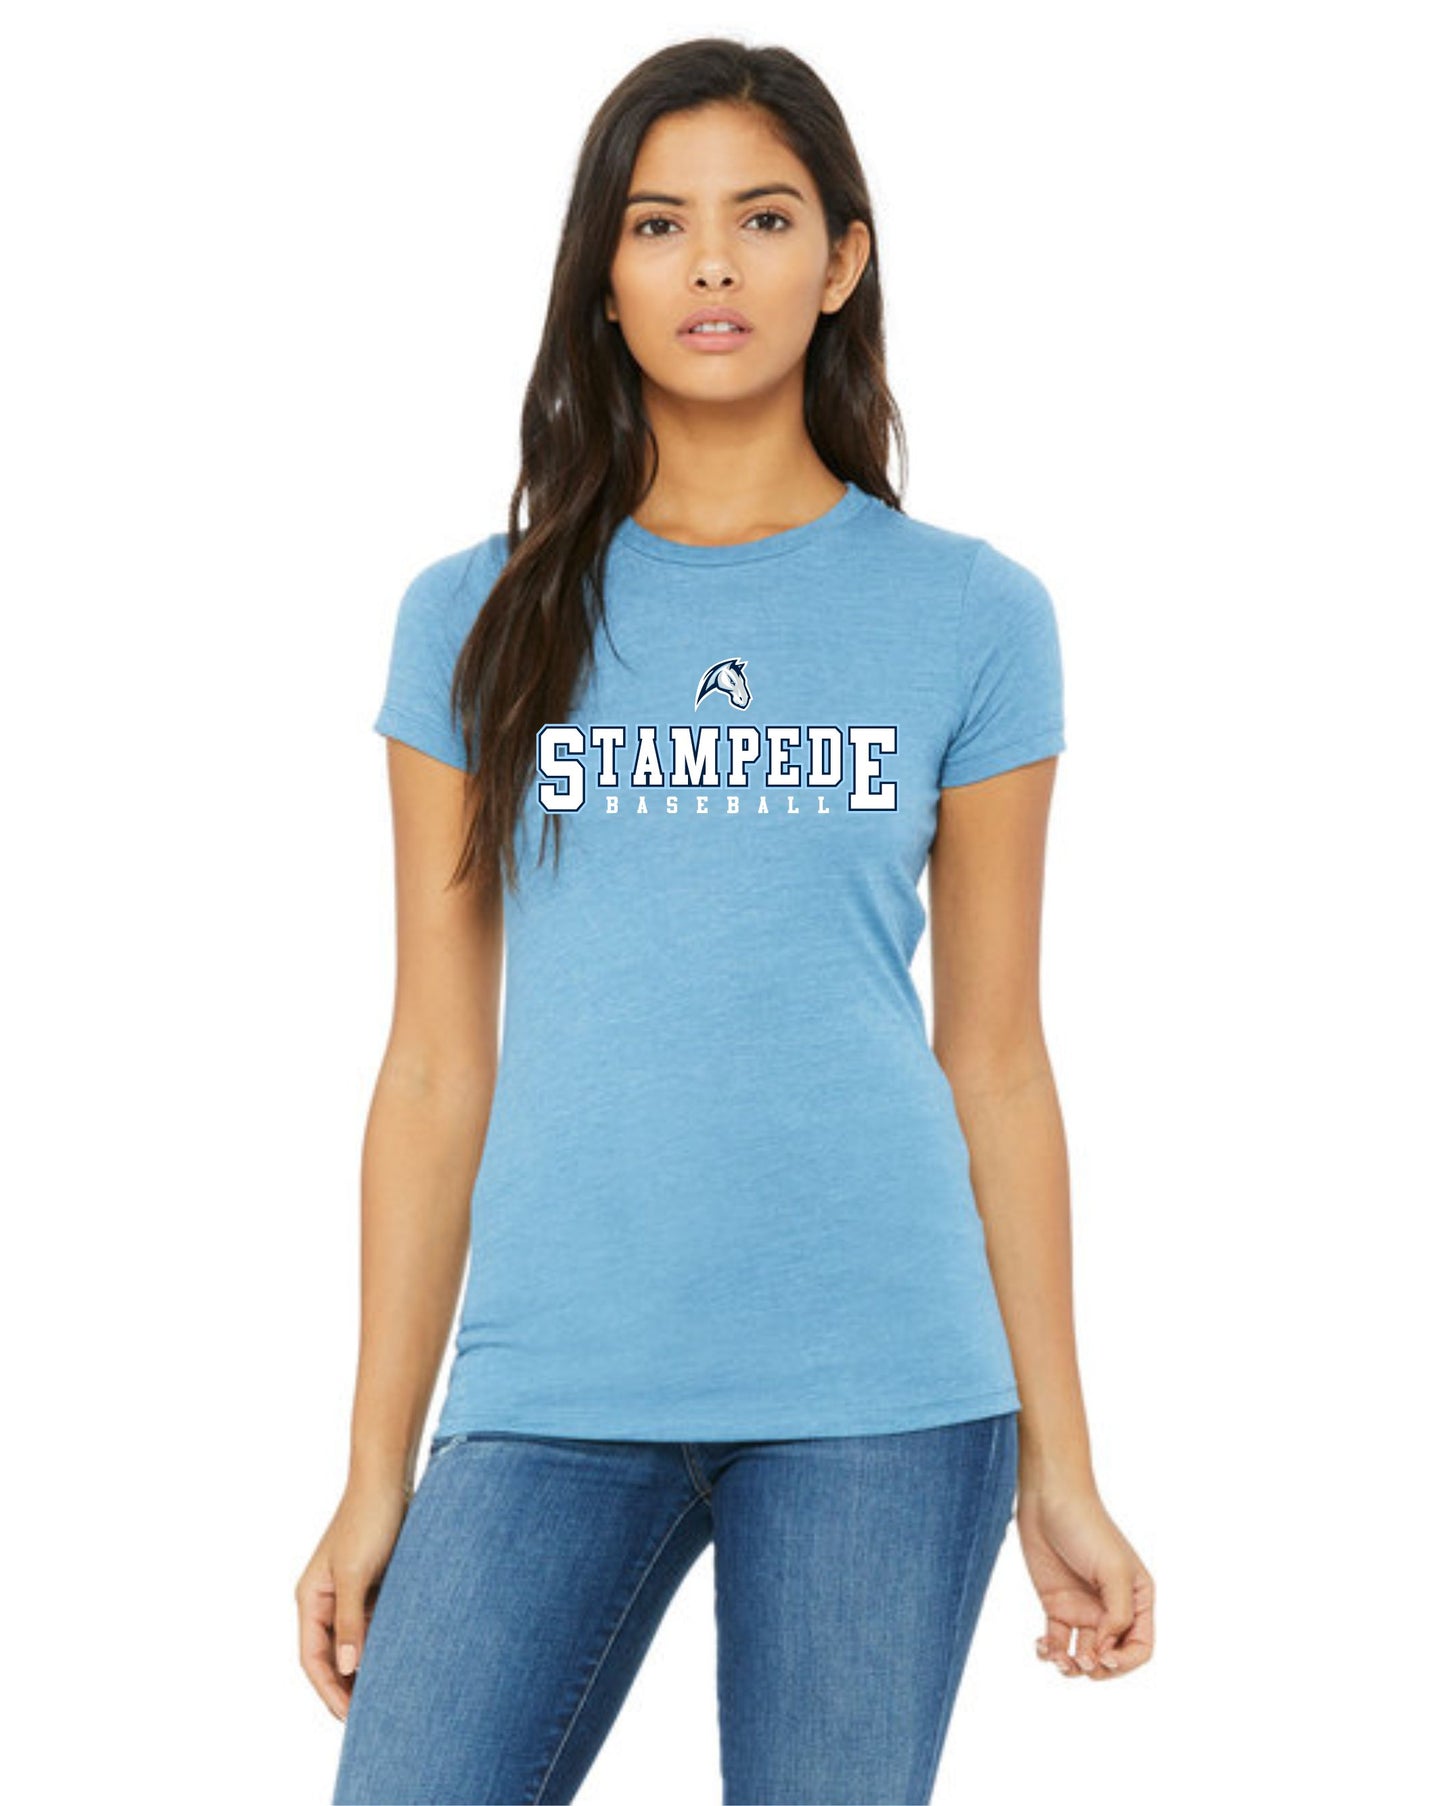 Stampede Women's Fitted T-Shirt